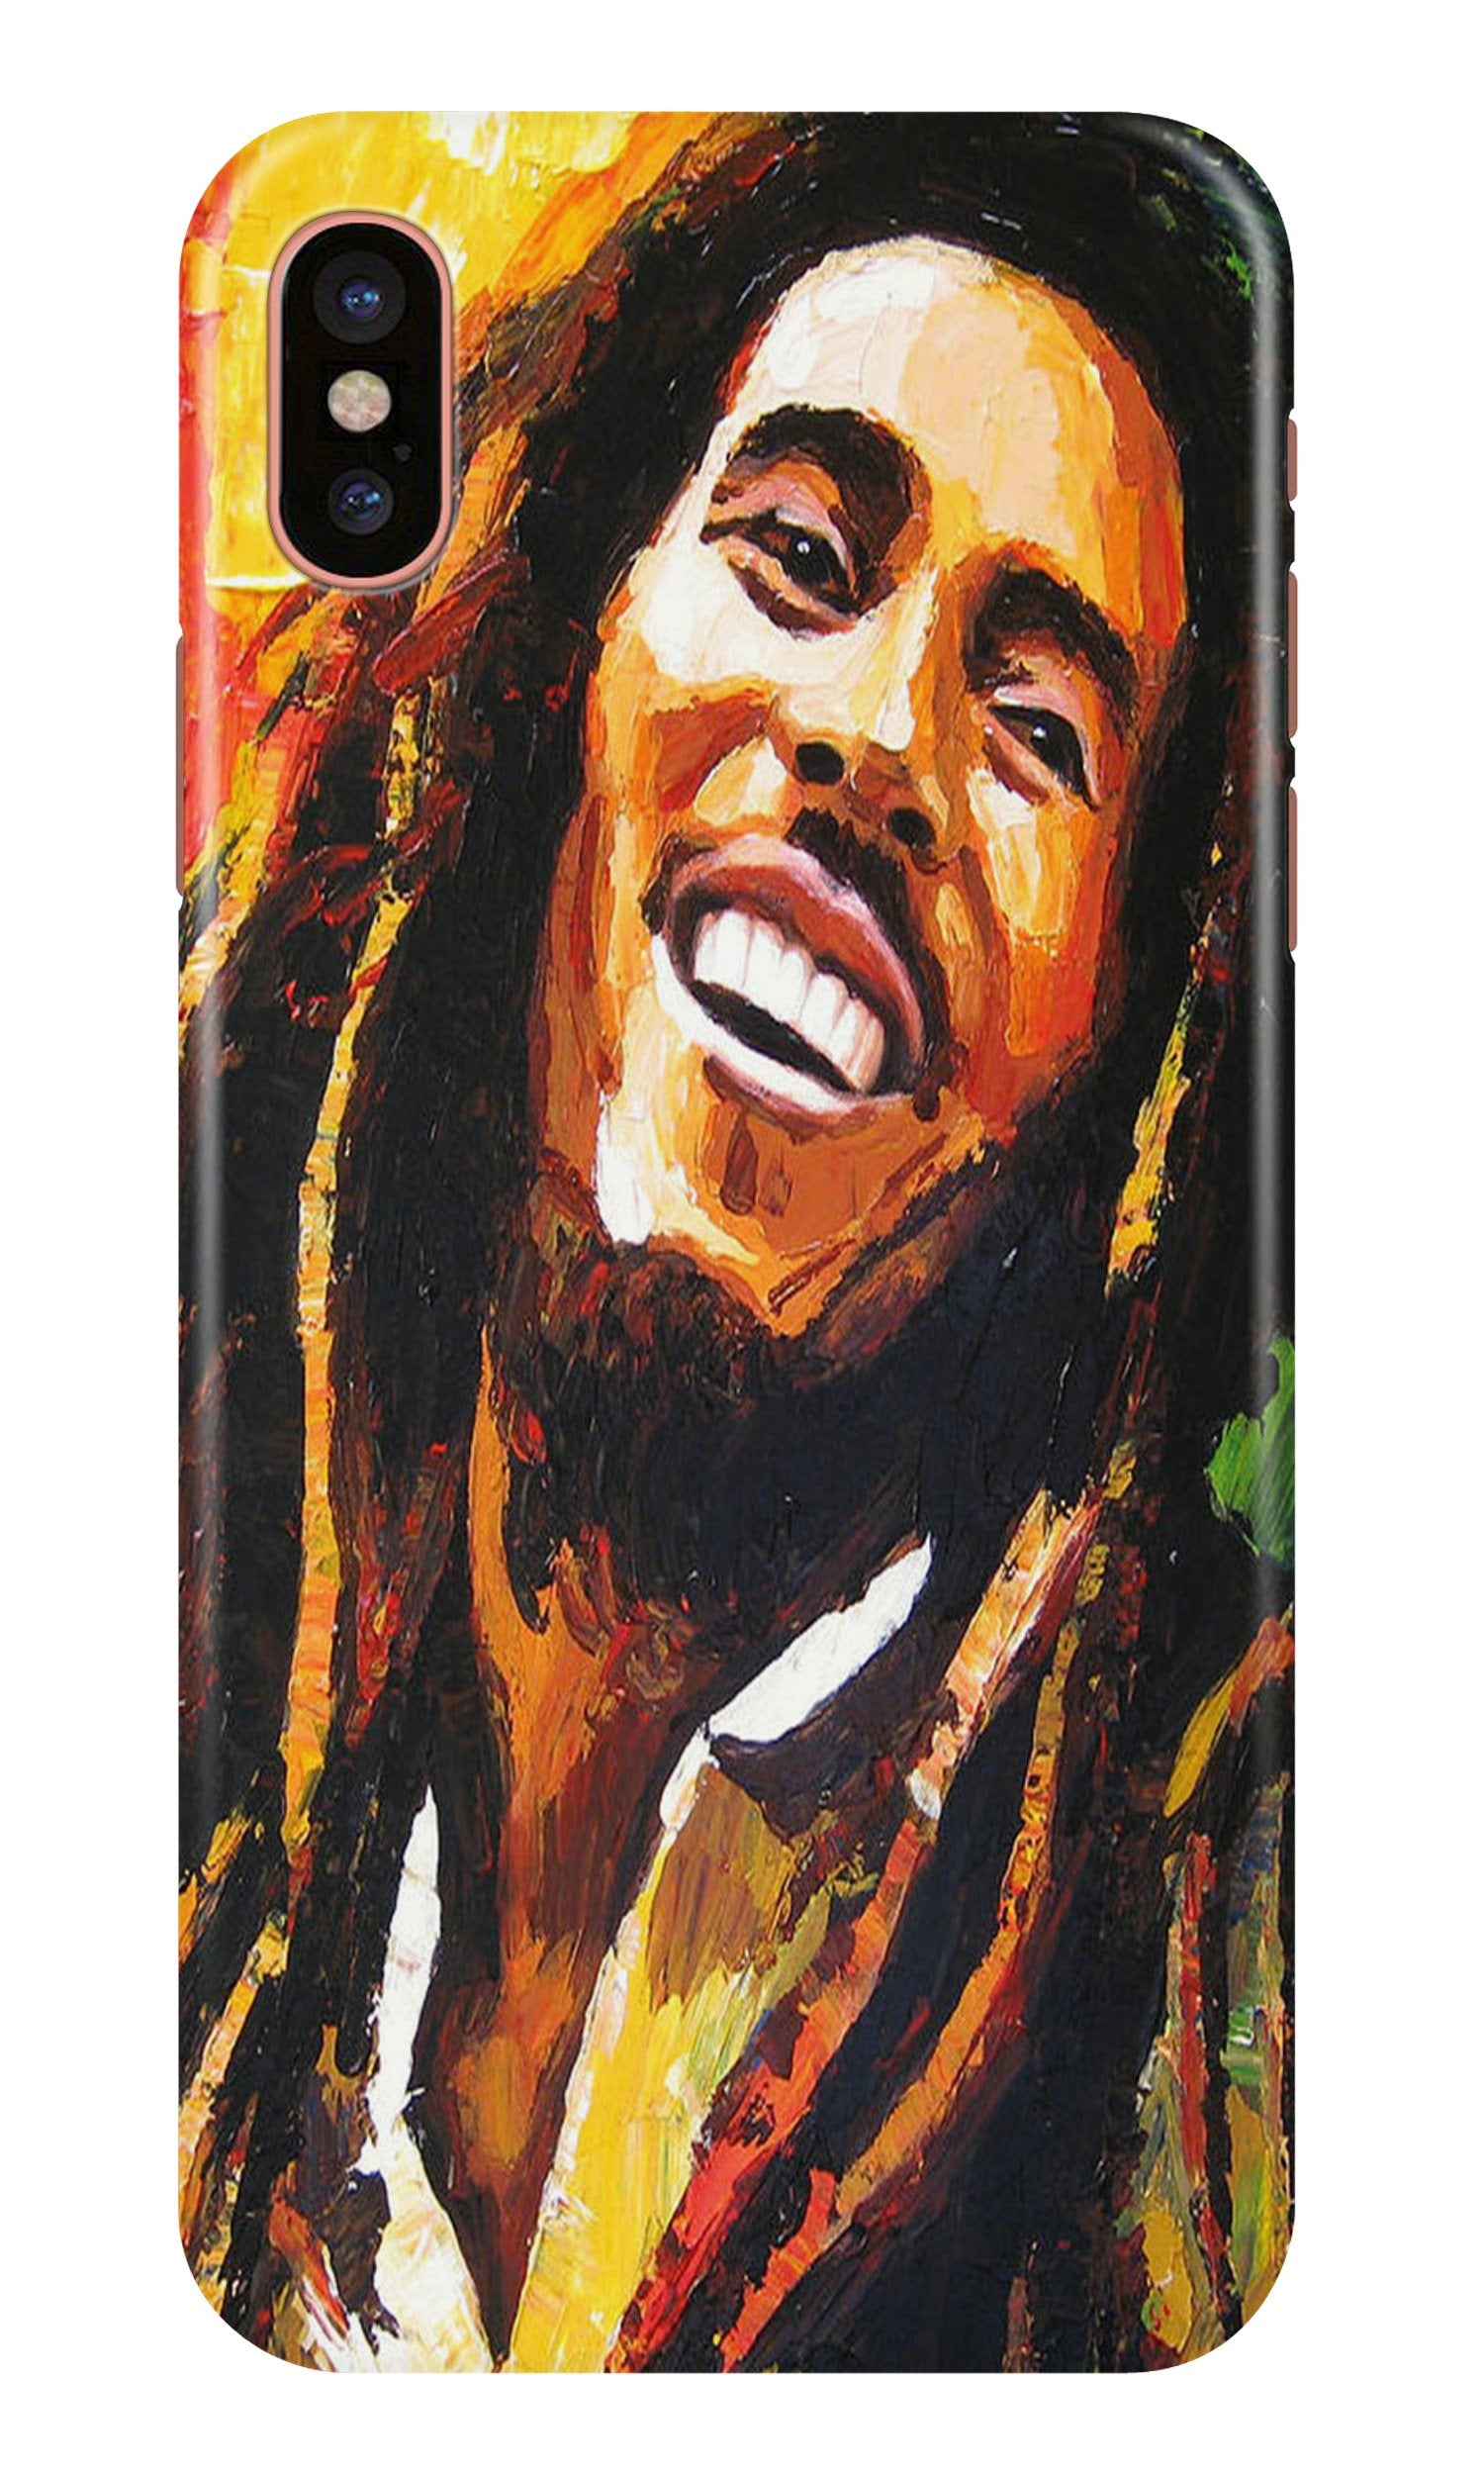 Bob marley Case for iPhone Xs (Design No. 295)